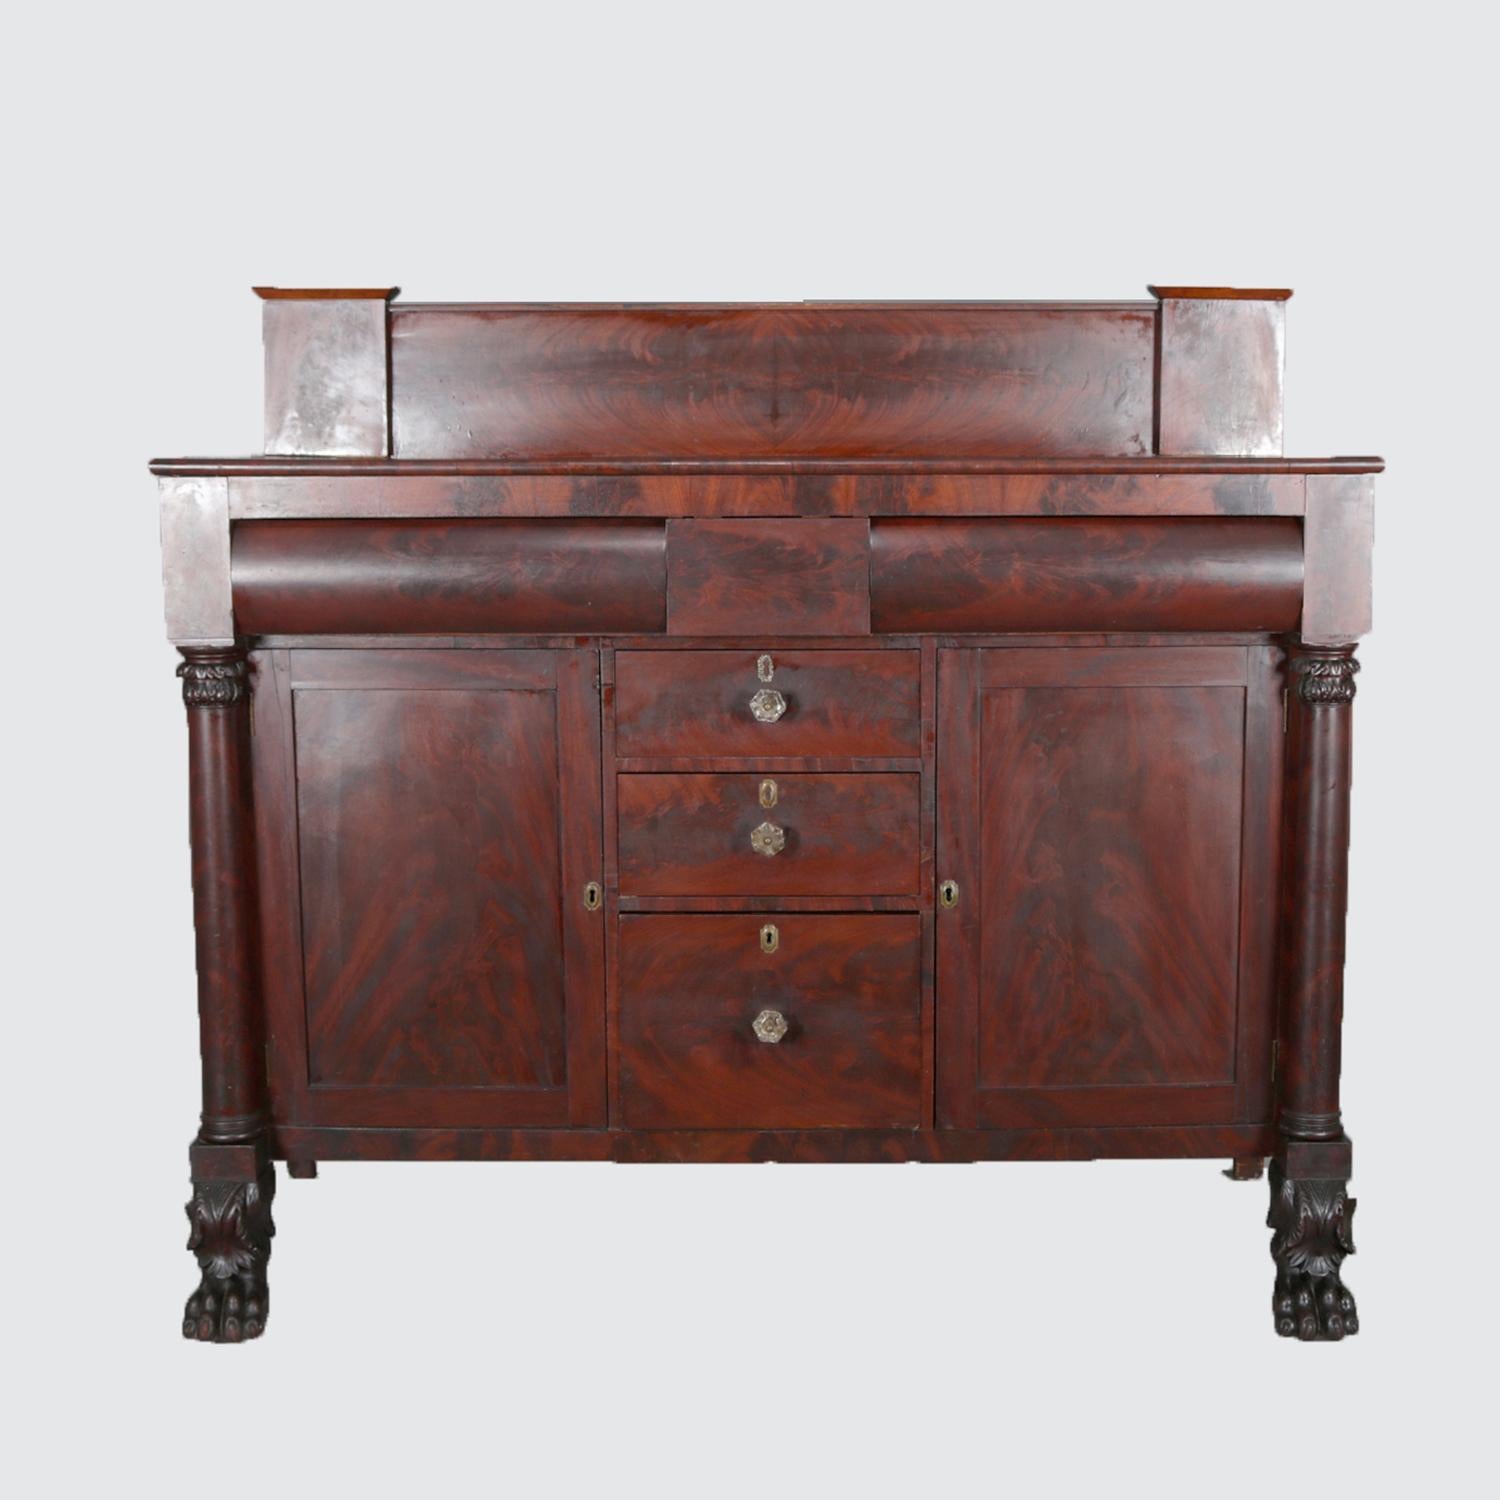 An antique Classical American Empire flame mahogany sideboard features serving platform with backsplash surmounting case with two upper convex drawers over three stacked central drawers flanked by side cabinets and full Corinthian column-form